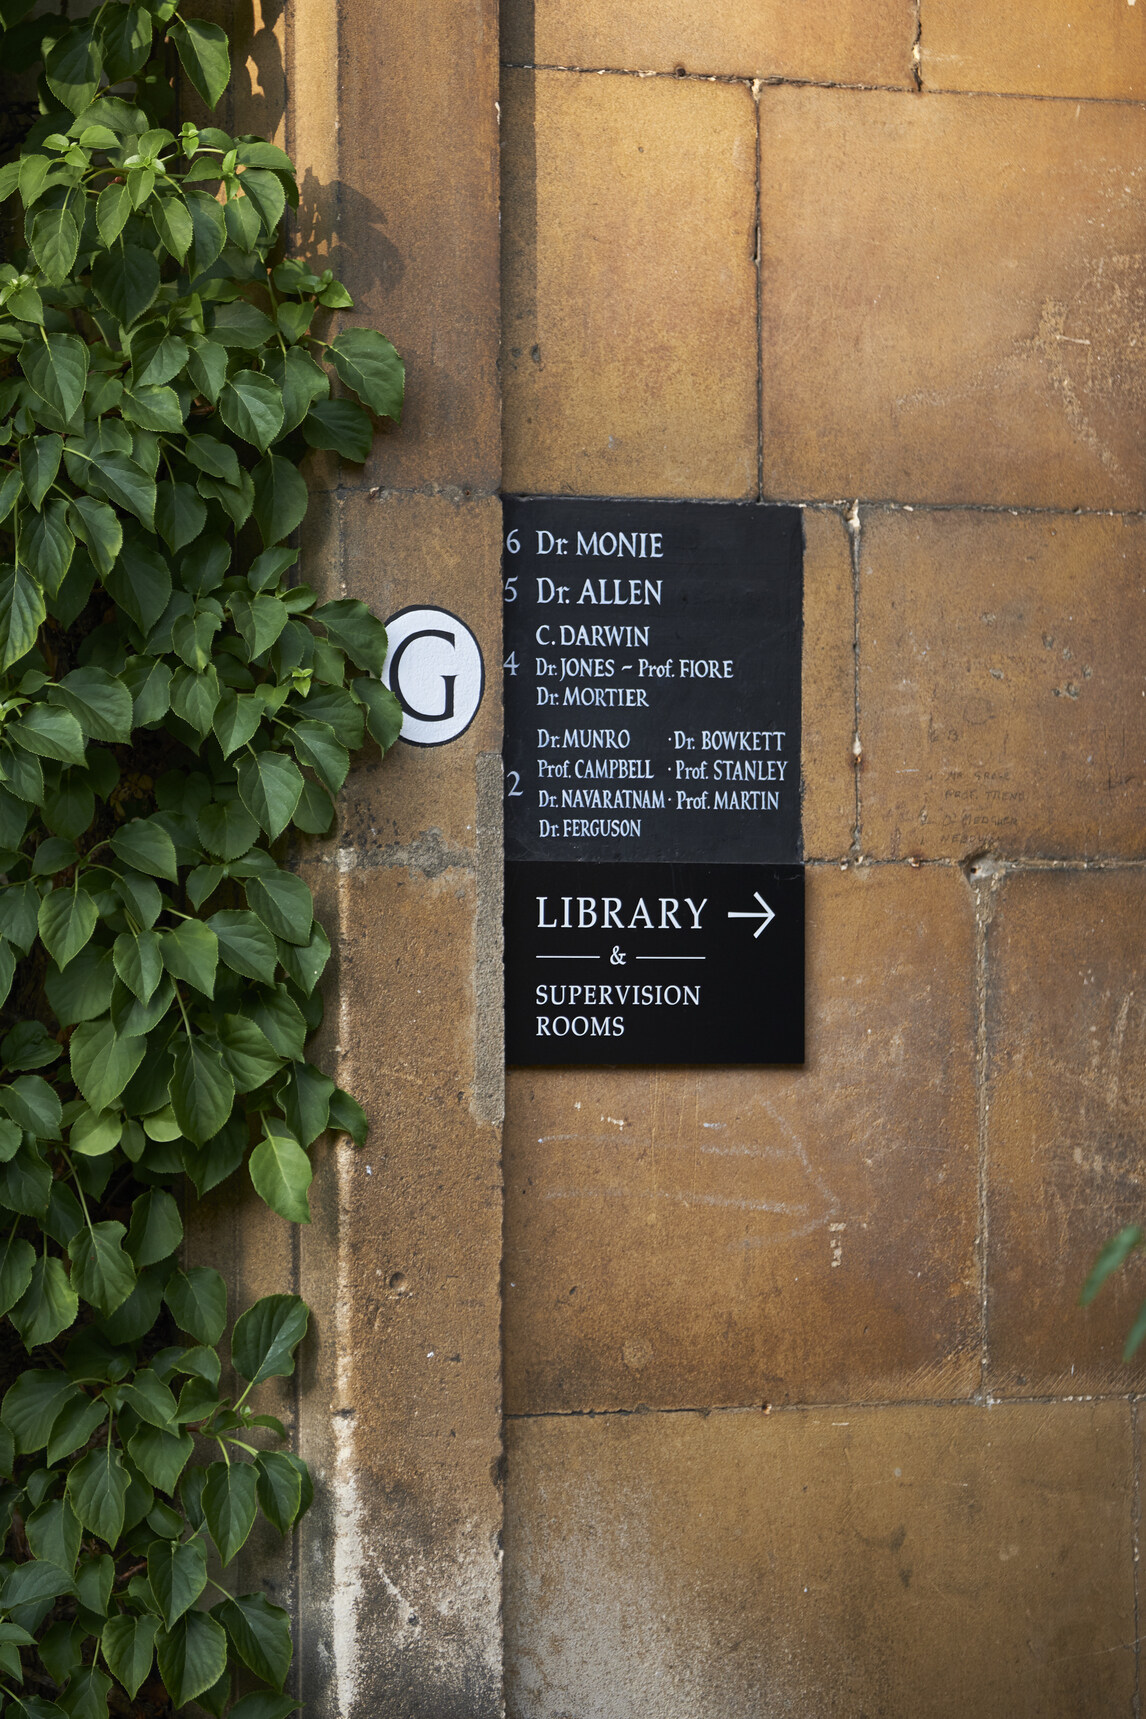 Sign showing rooms in G staircase, including C Darwin. 